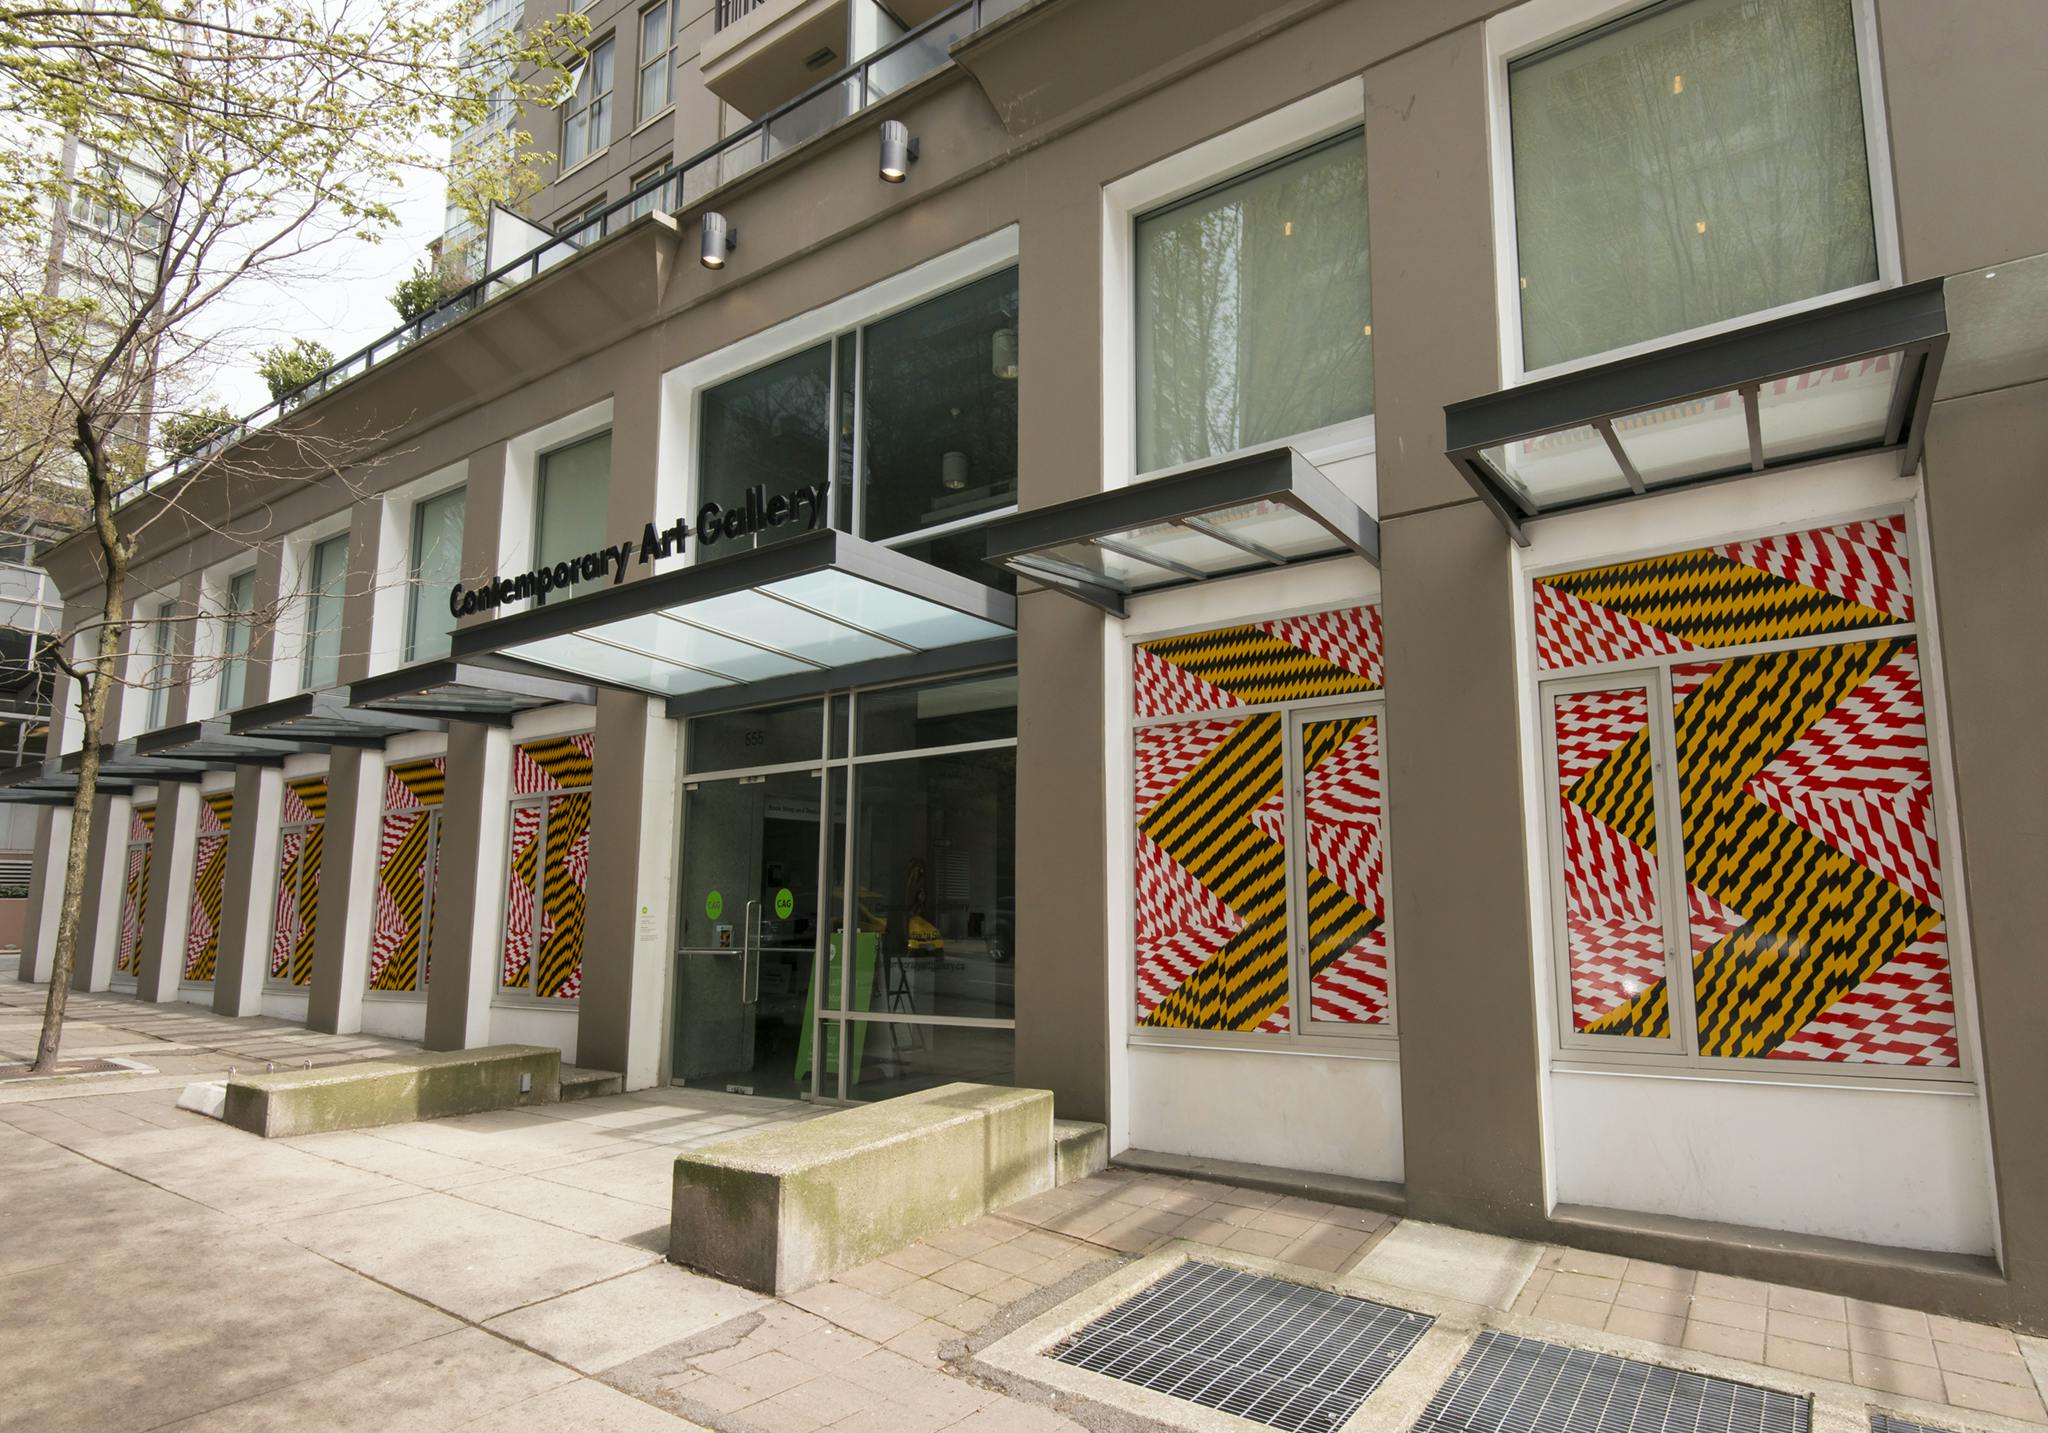 Exterior image of CAG with red-and-white and black-and-yellow caution tape installed across the ground floor façade windows. The tape forms zig-zag lines and shapes, covering each window.